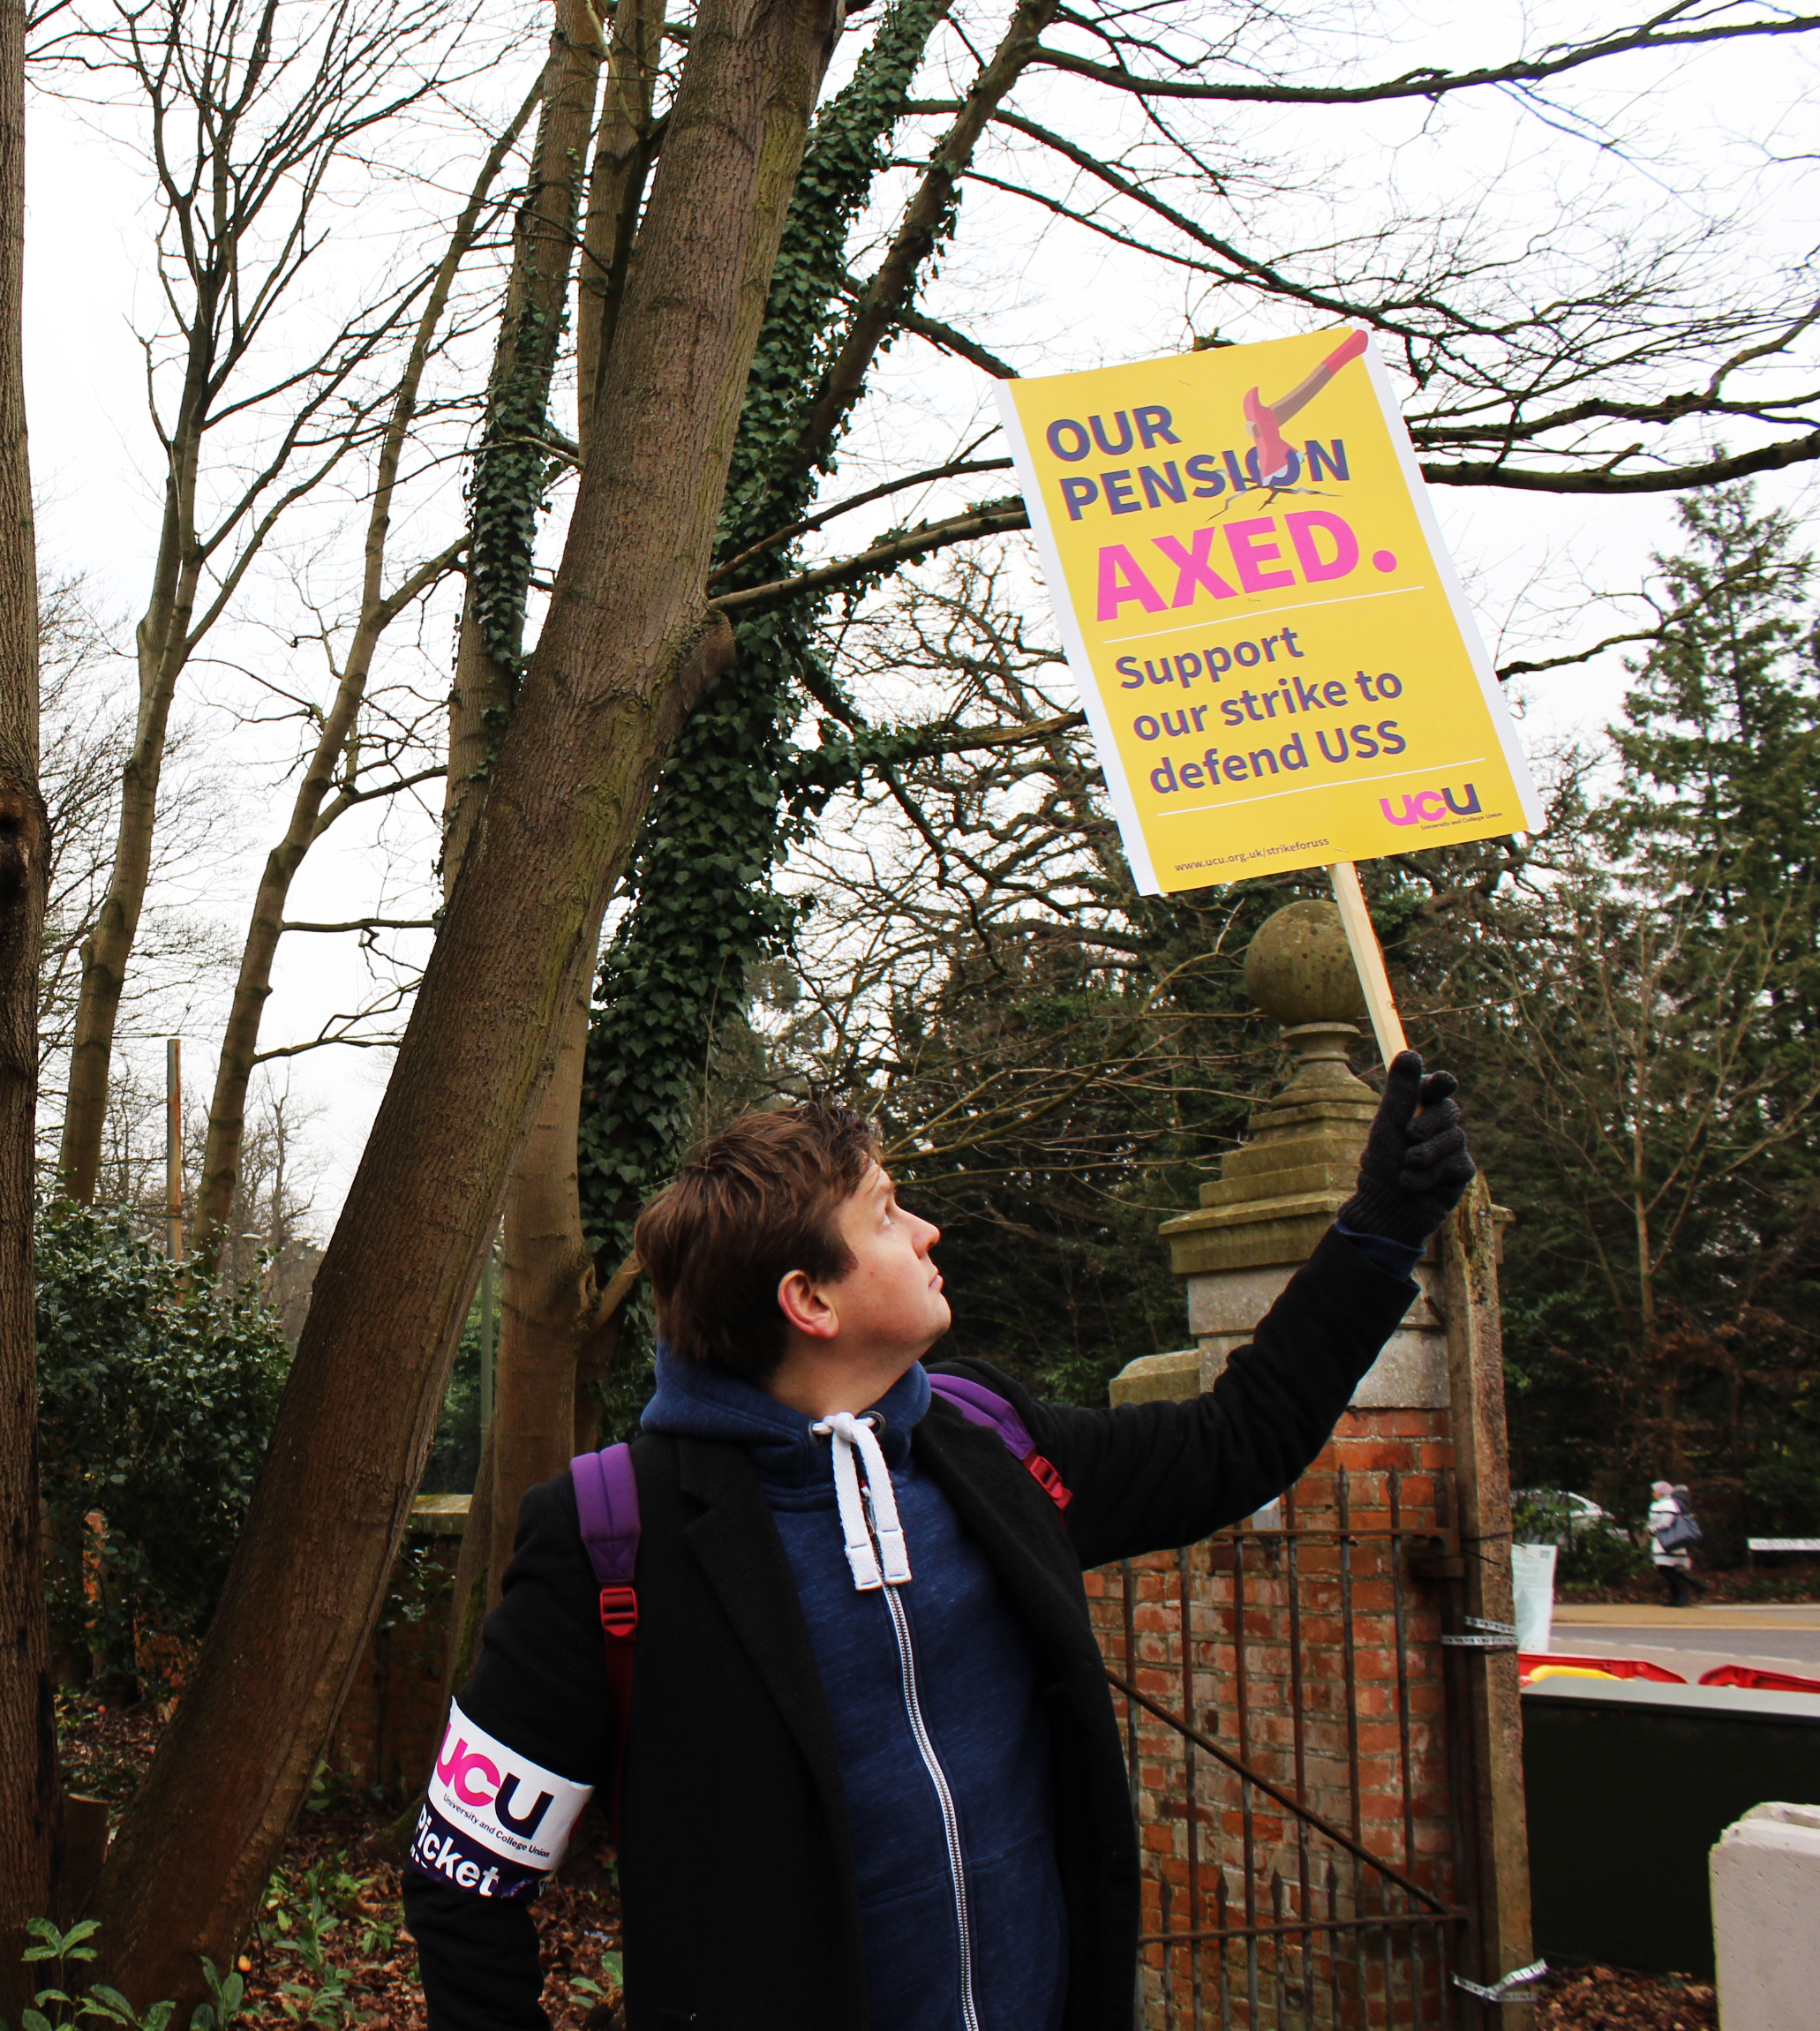 UCU Warns of an Extension of Strike Action